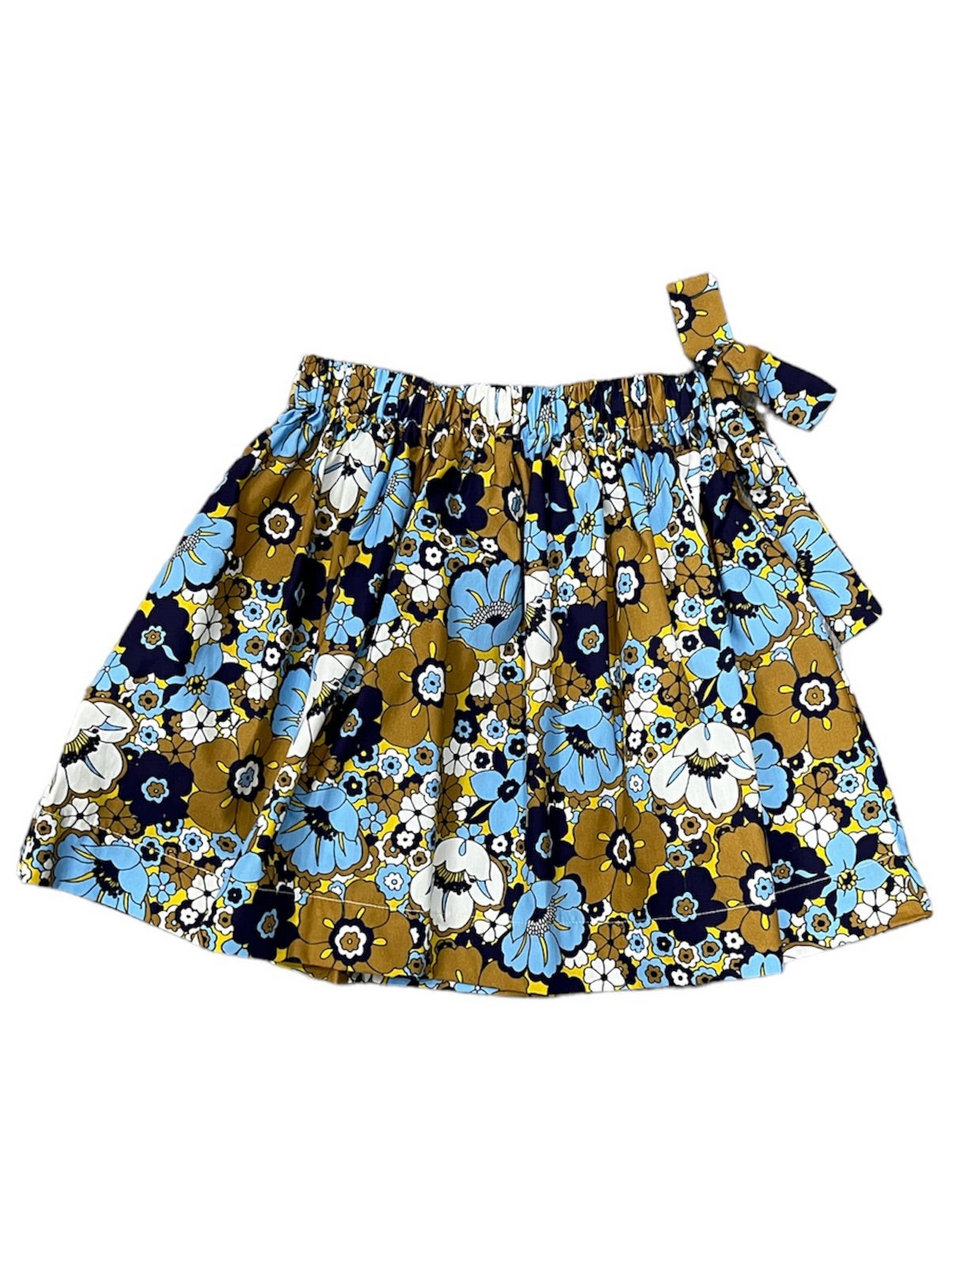 Be For All Blue/Brown Floral Skirt